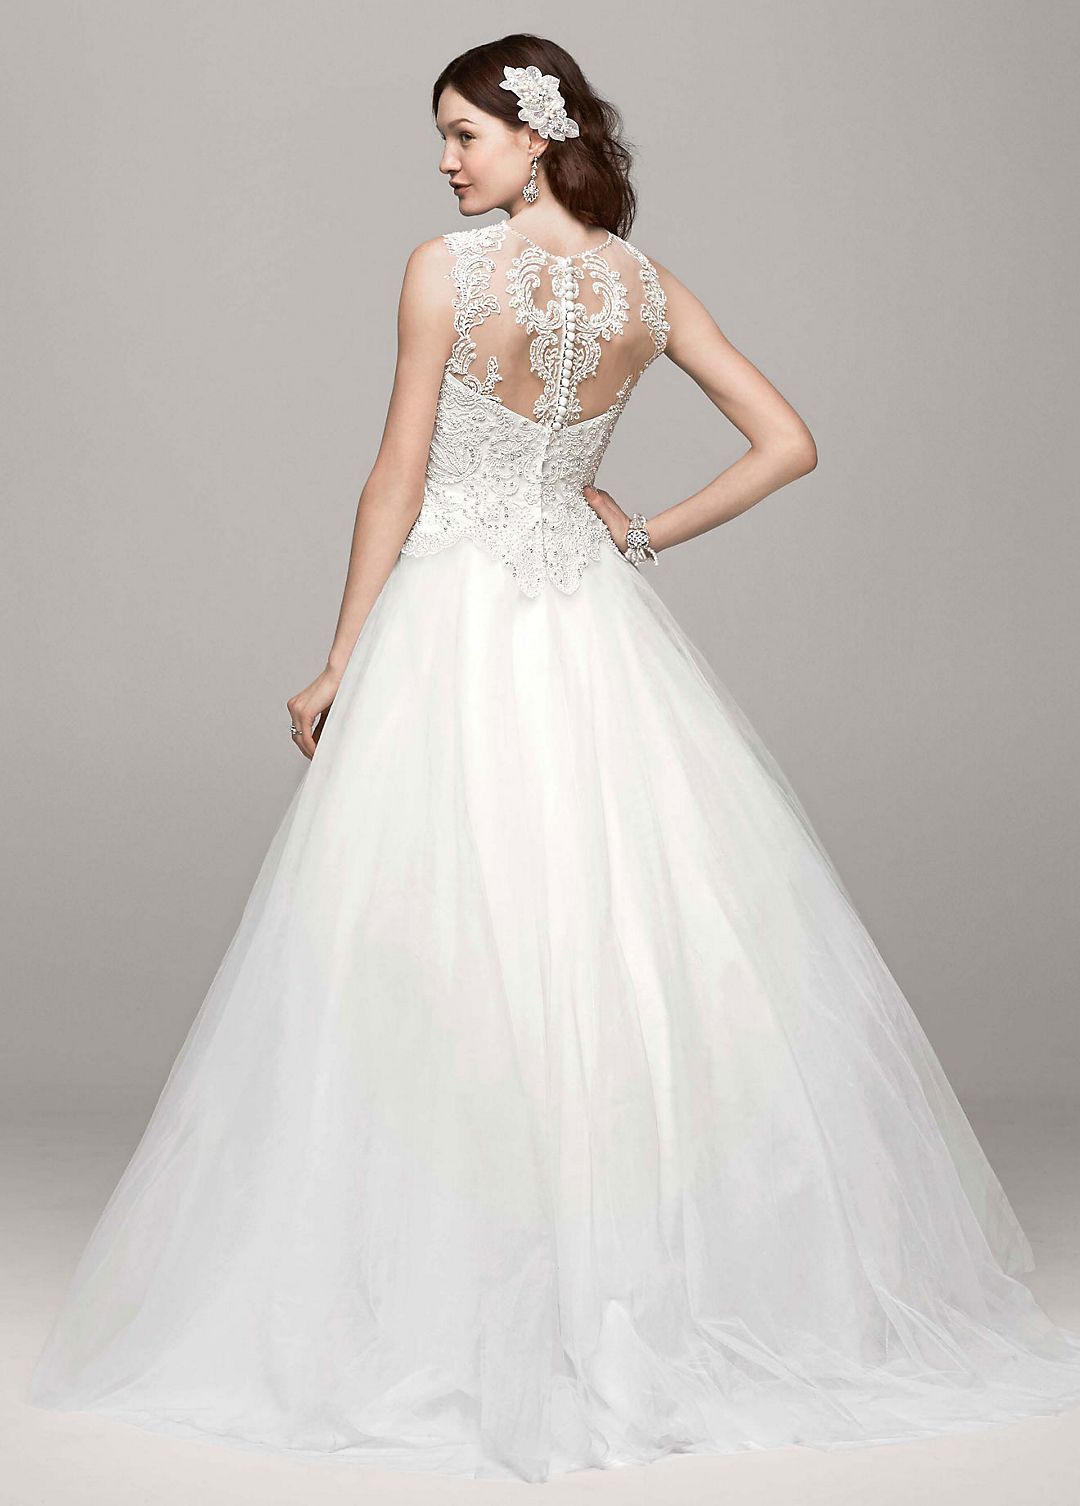 Tulle Ball Gown with Illusion Back Detail Image 2